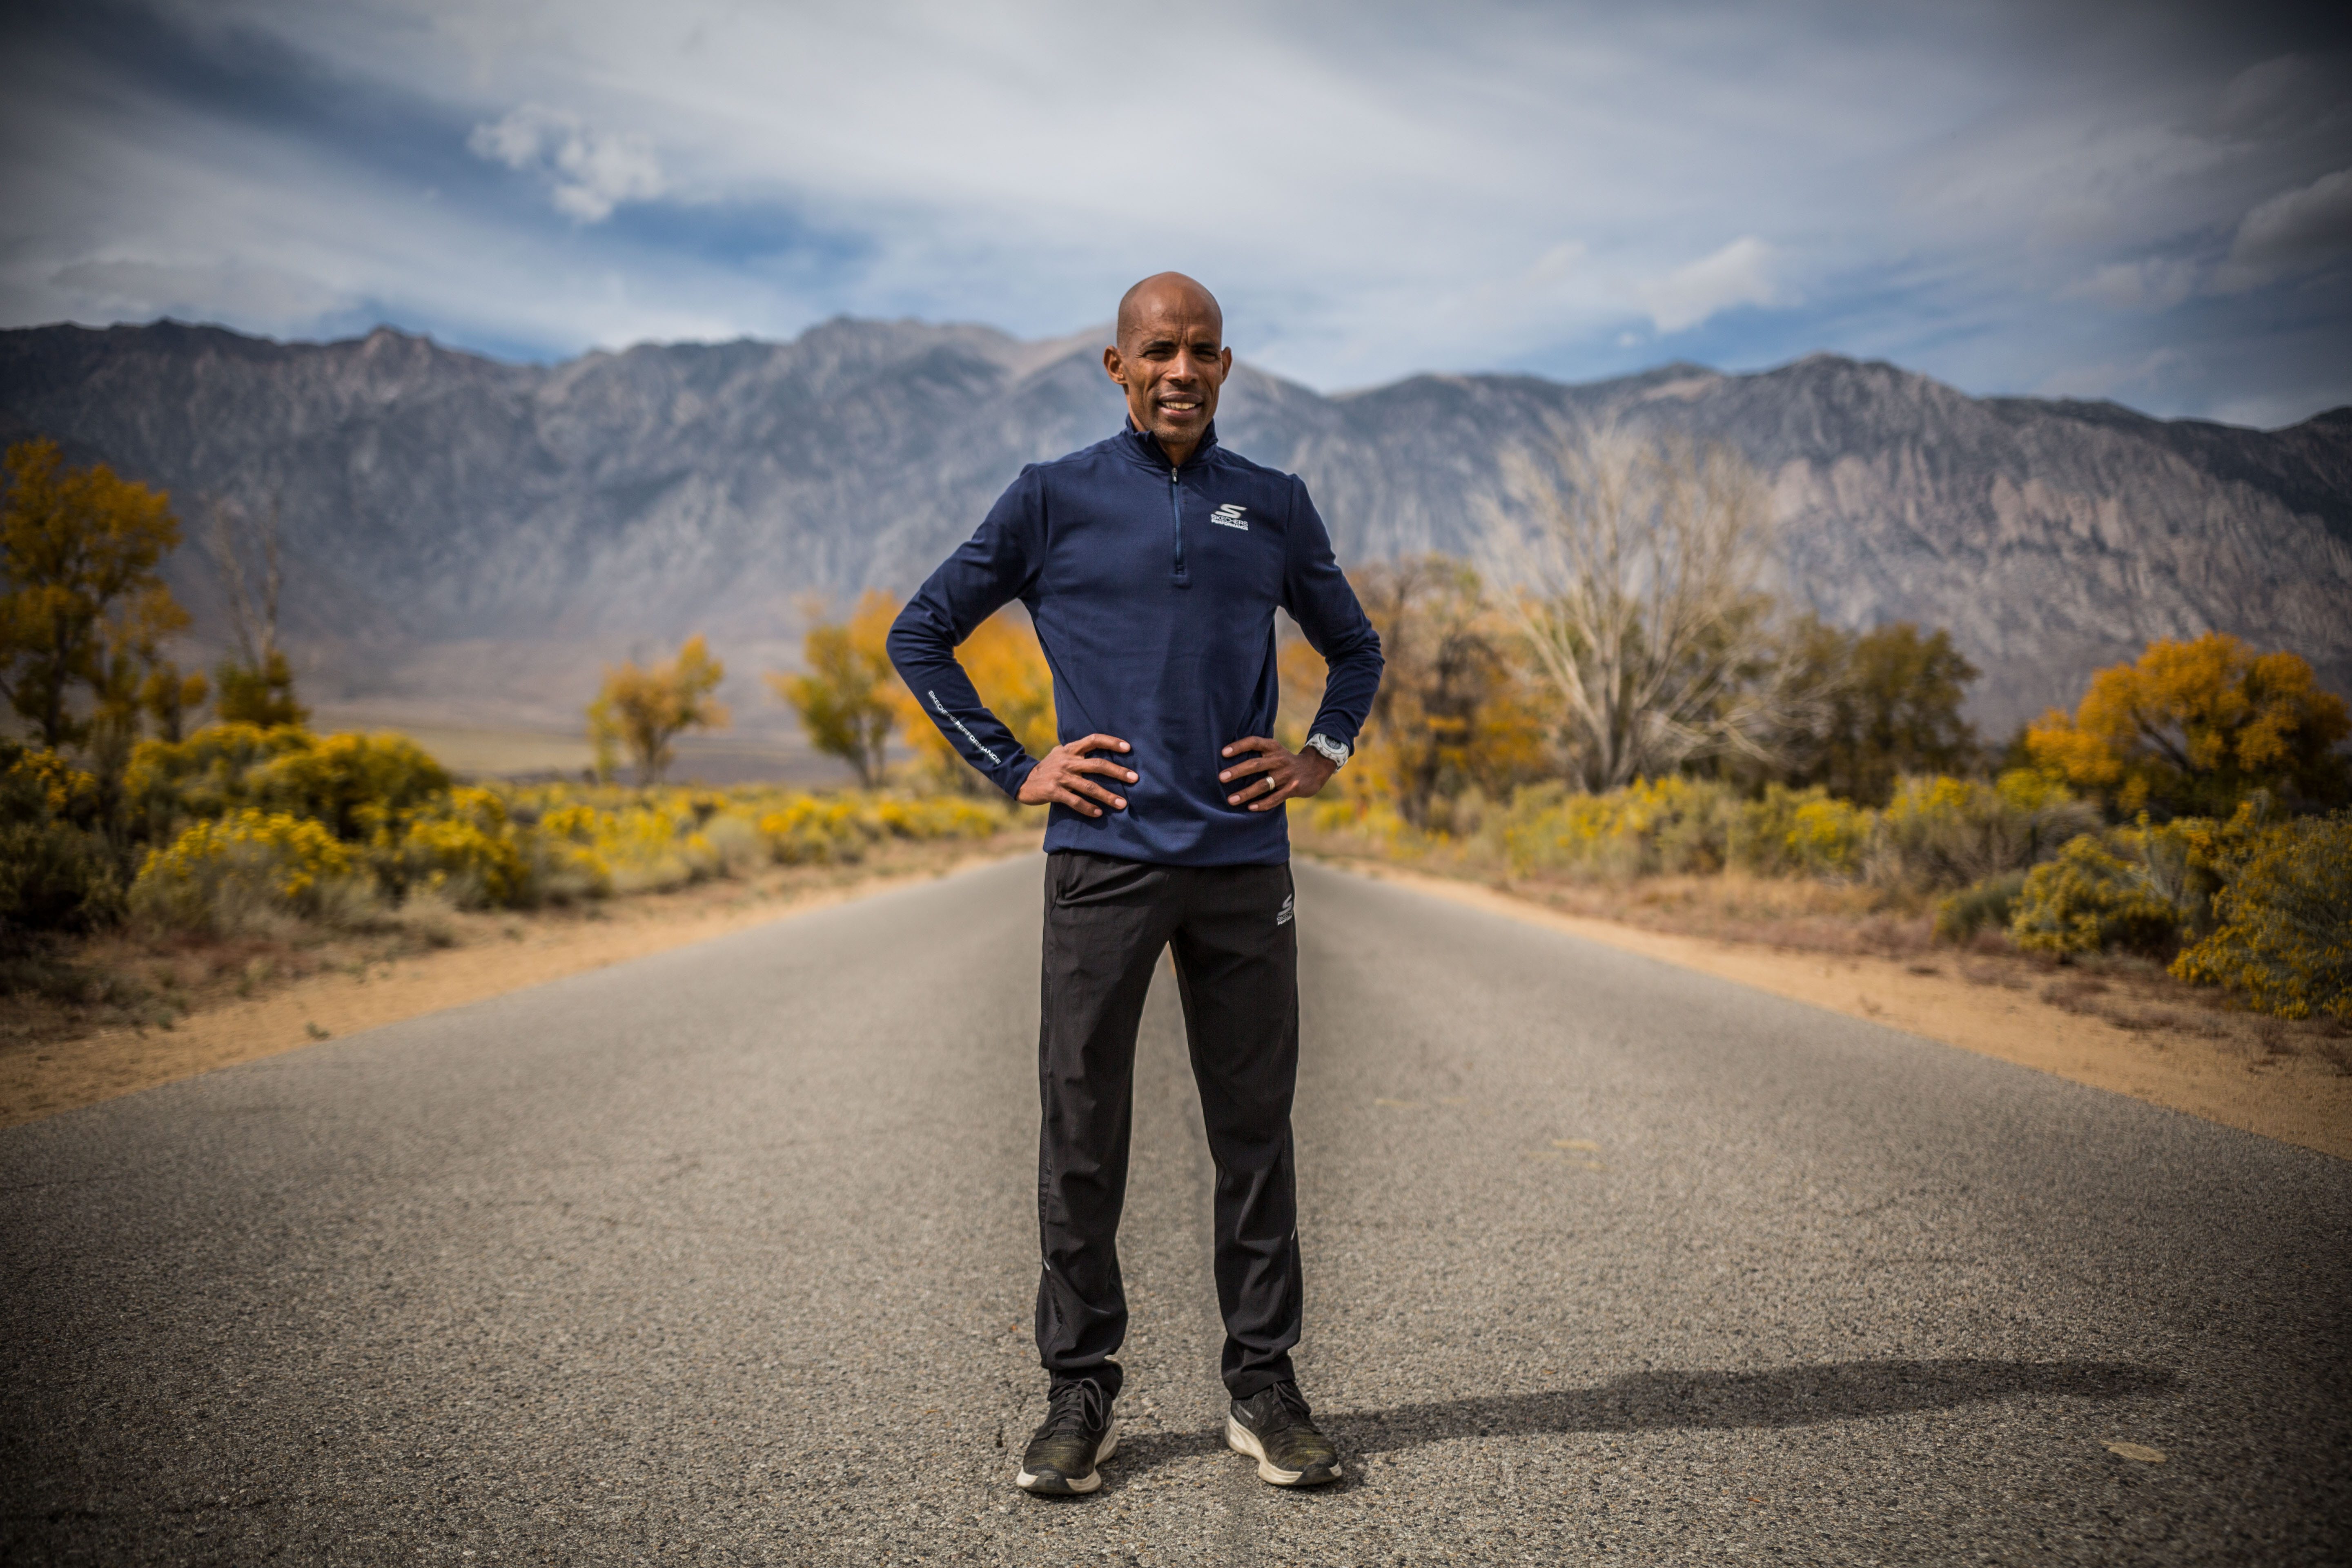 Performance™ Celebrates Meb's Epic Run in New York City Business Wire